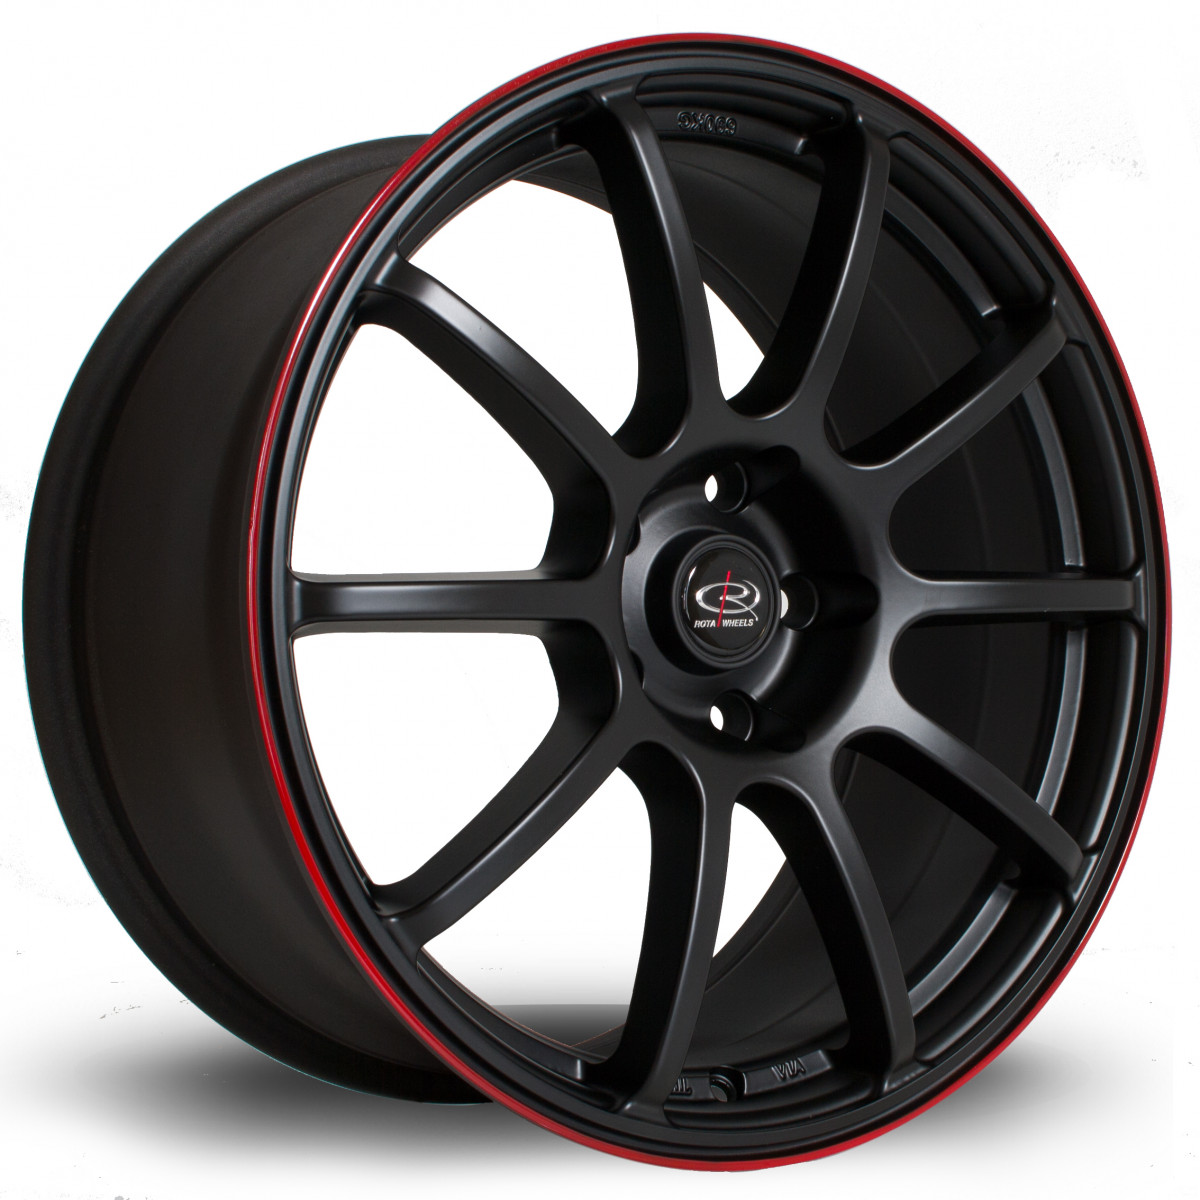 Force 18x8.5 5x114 ET48 Flat Black with Red Lip